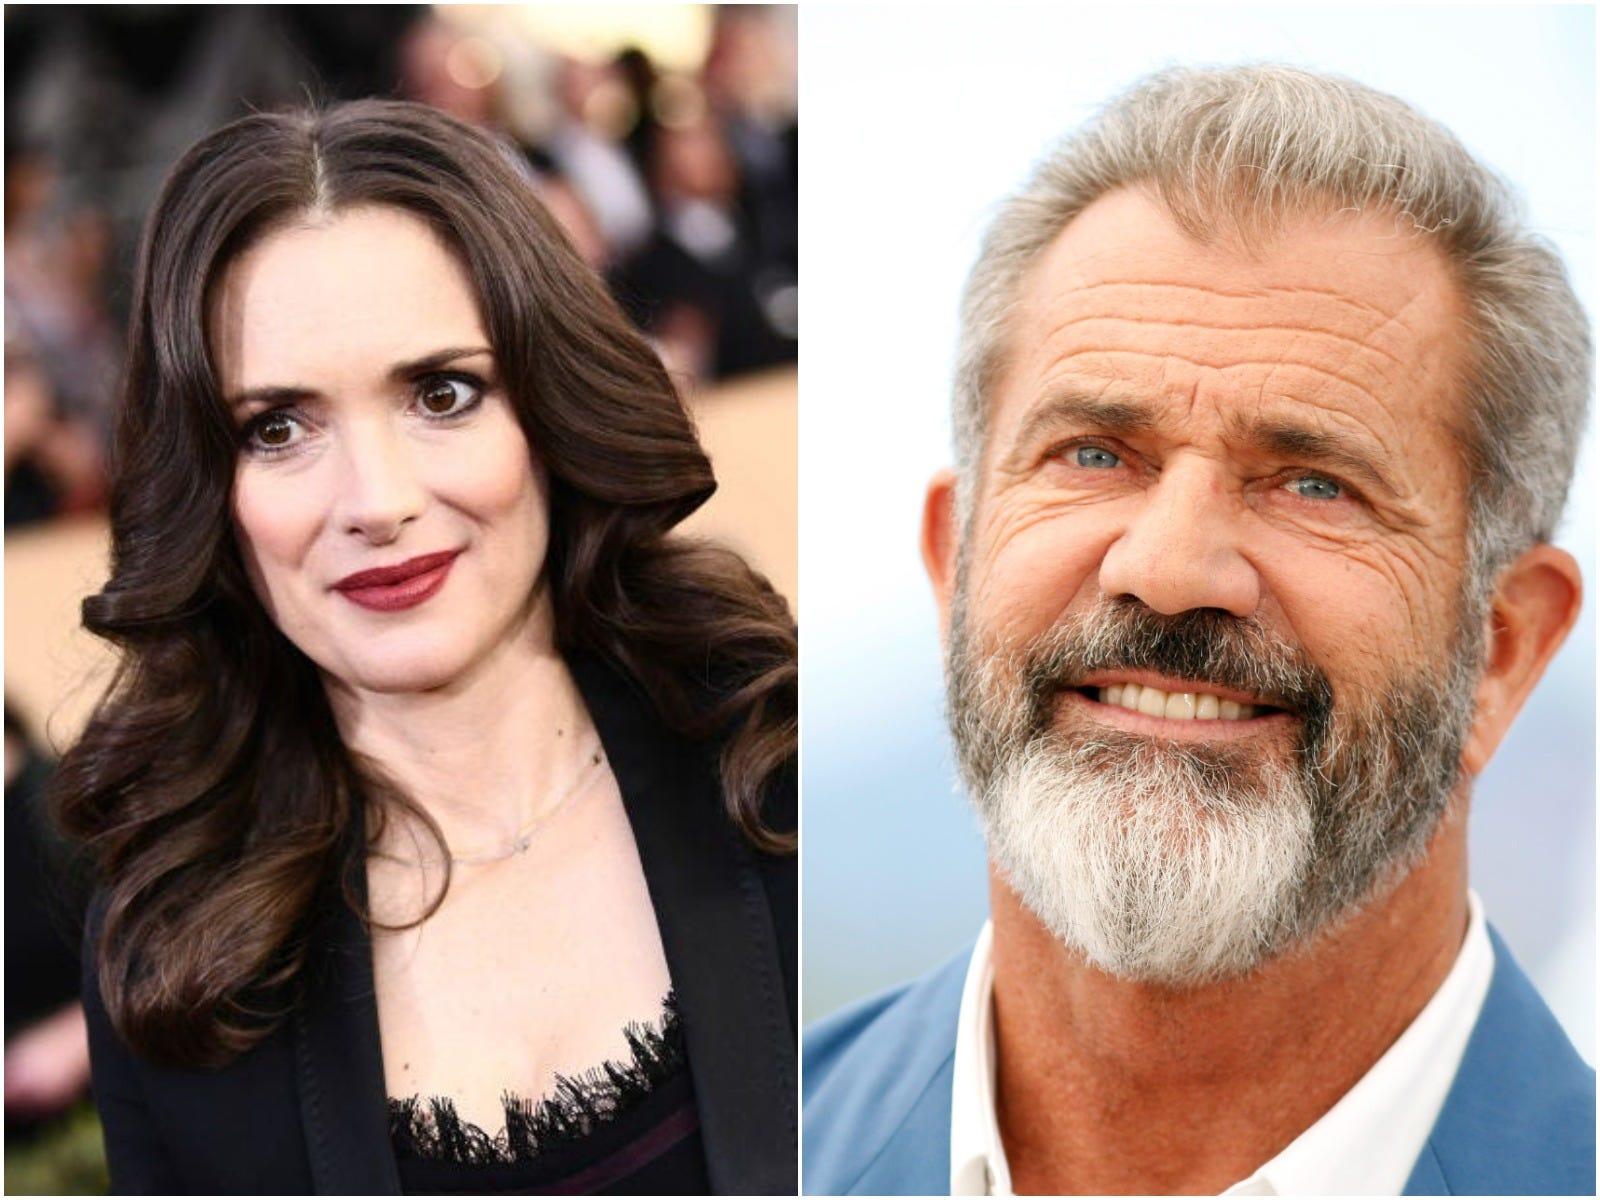 Winona Ryder Said Mel Gibson Once Asked If She Was An Oven Dodger Business Insider India 5761